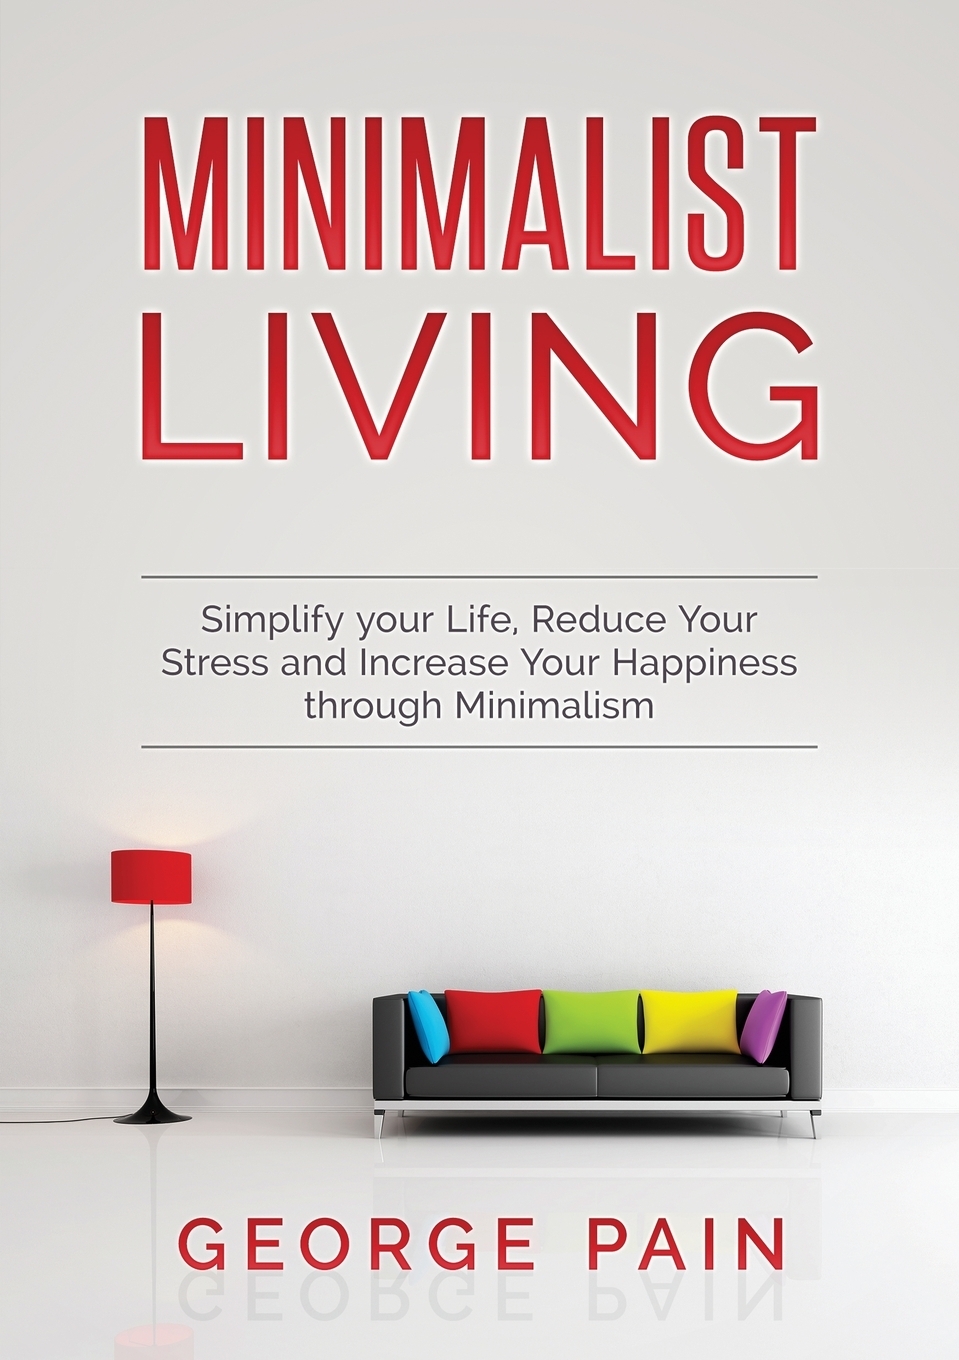 Simplify your Life, Reduce Your Stress and Increase Your Happiness through Minimalism. Minimalist Living